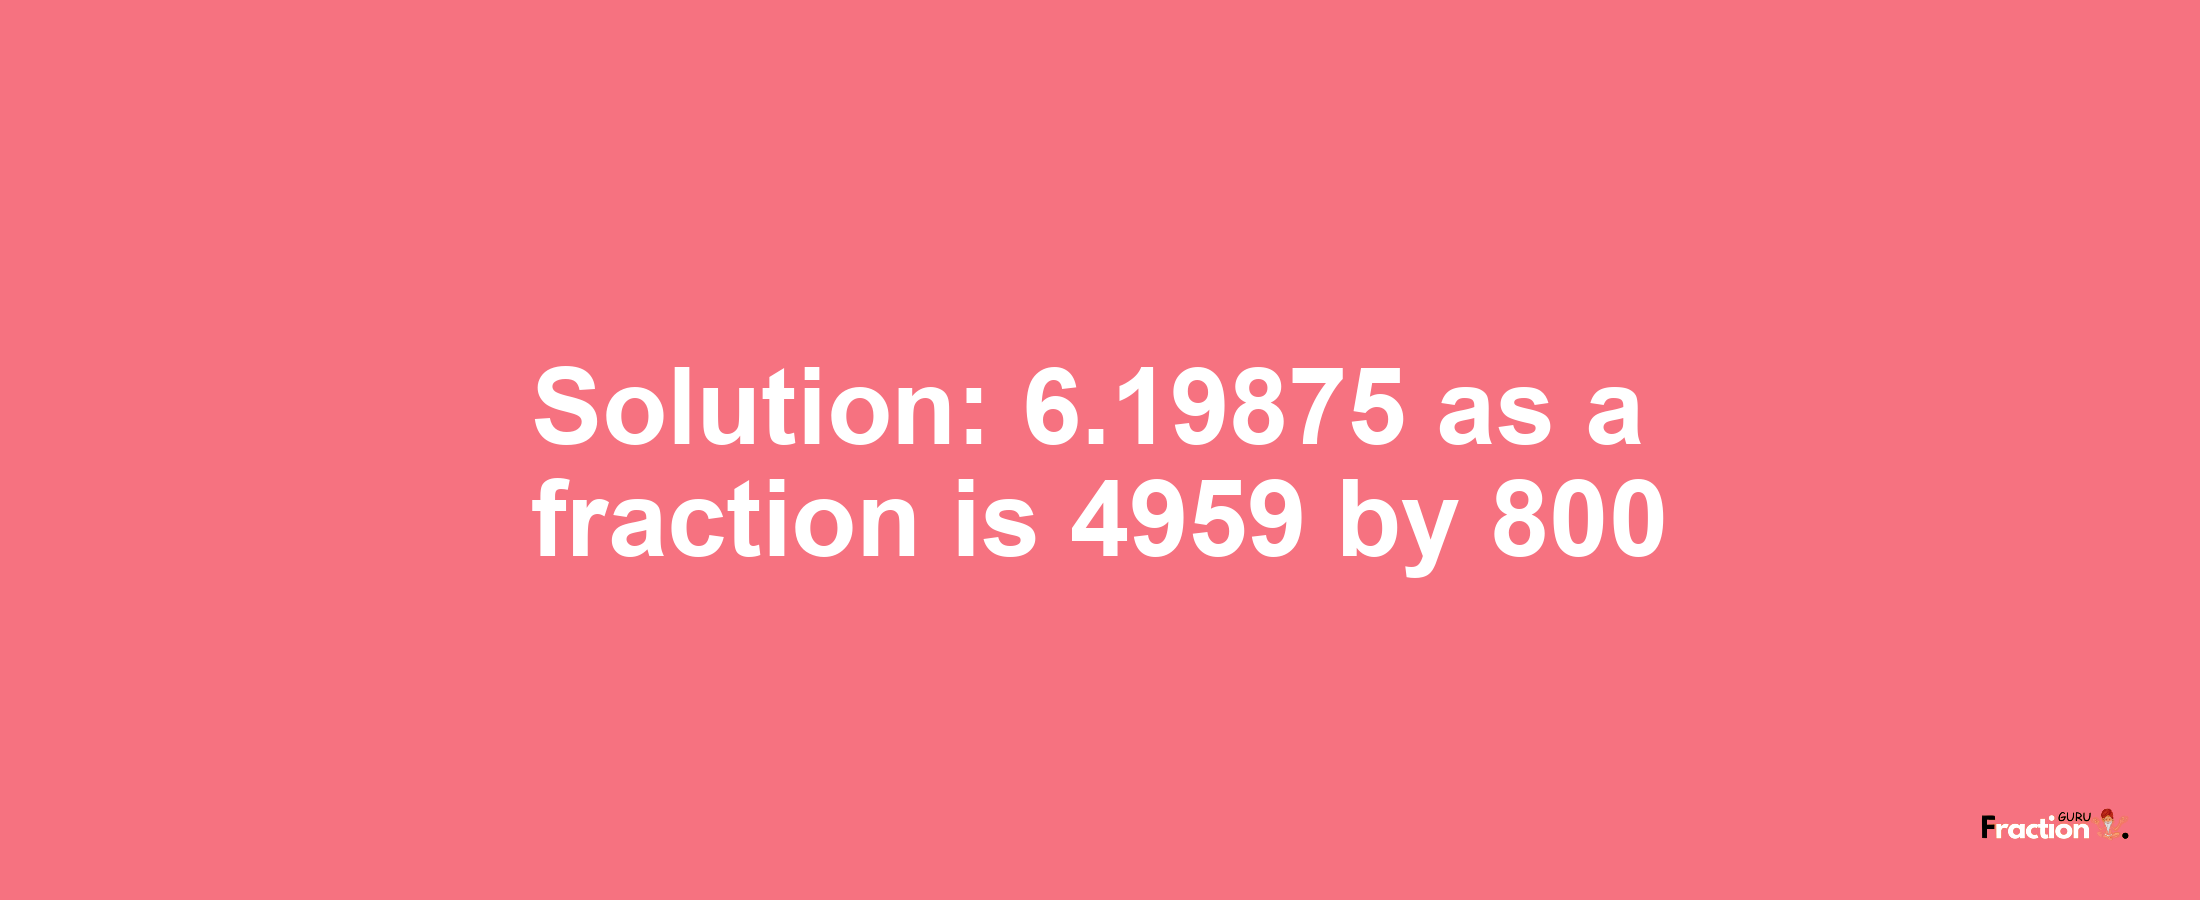 Solution:6.19875 as a fraction is 4959/800